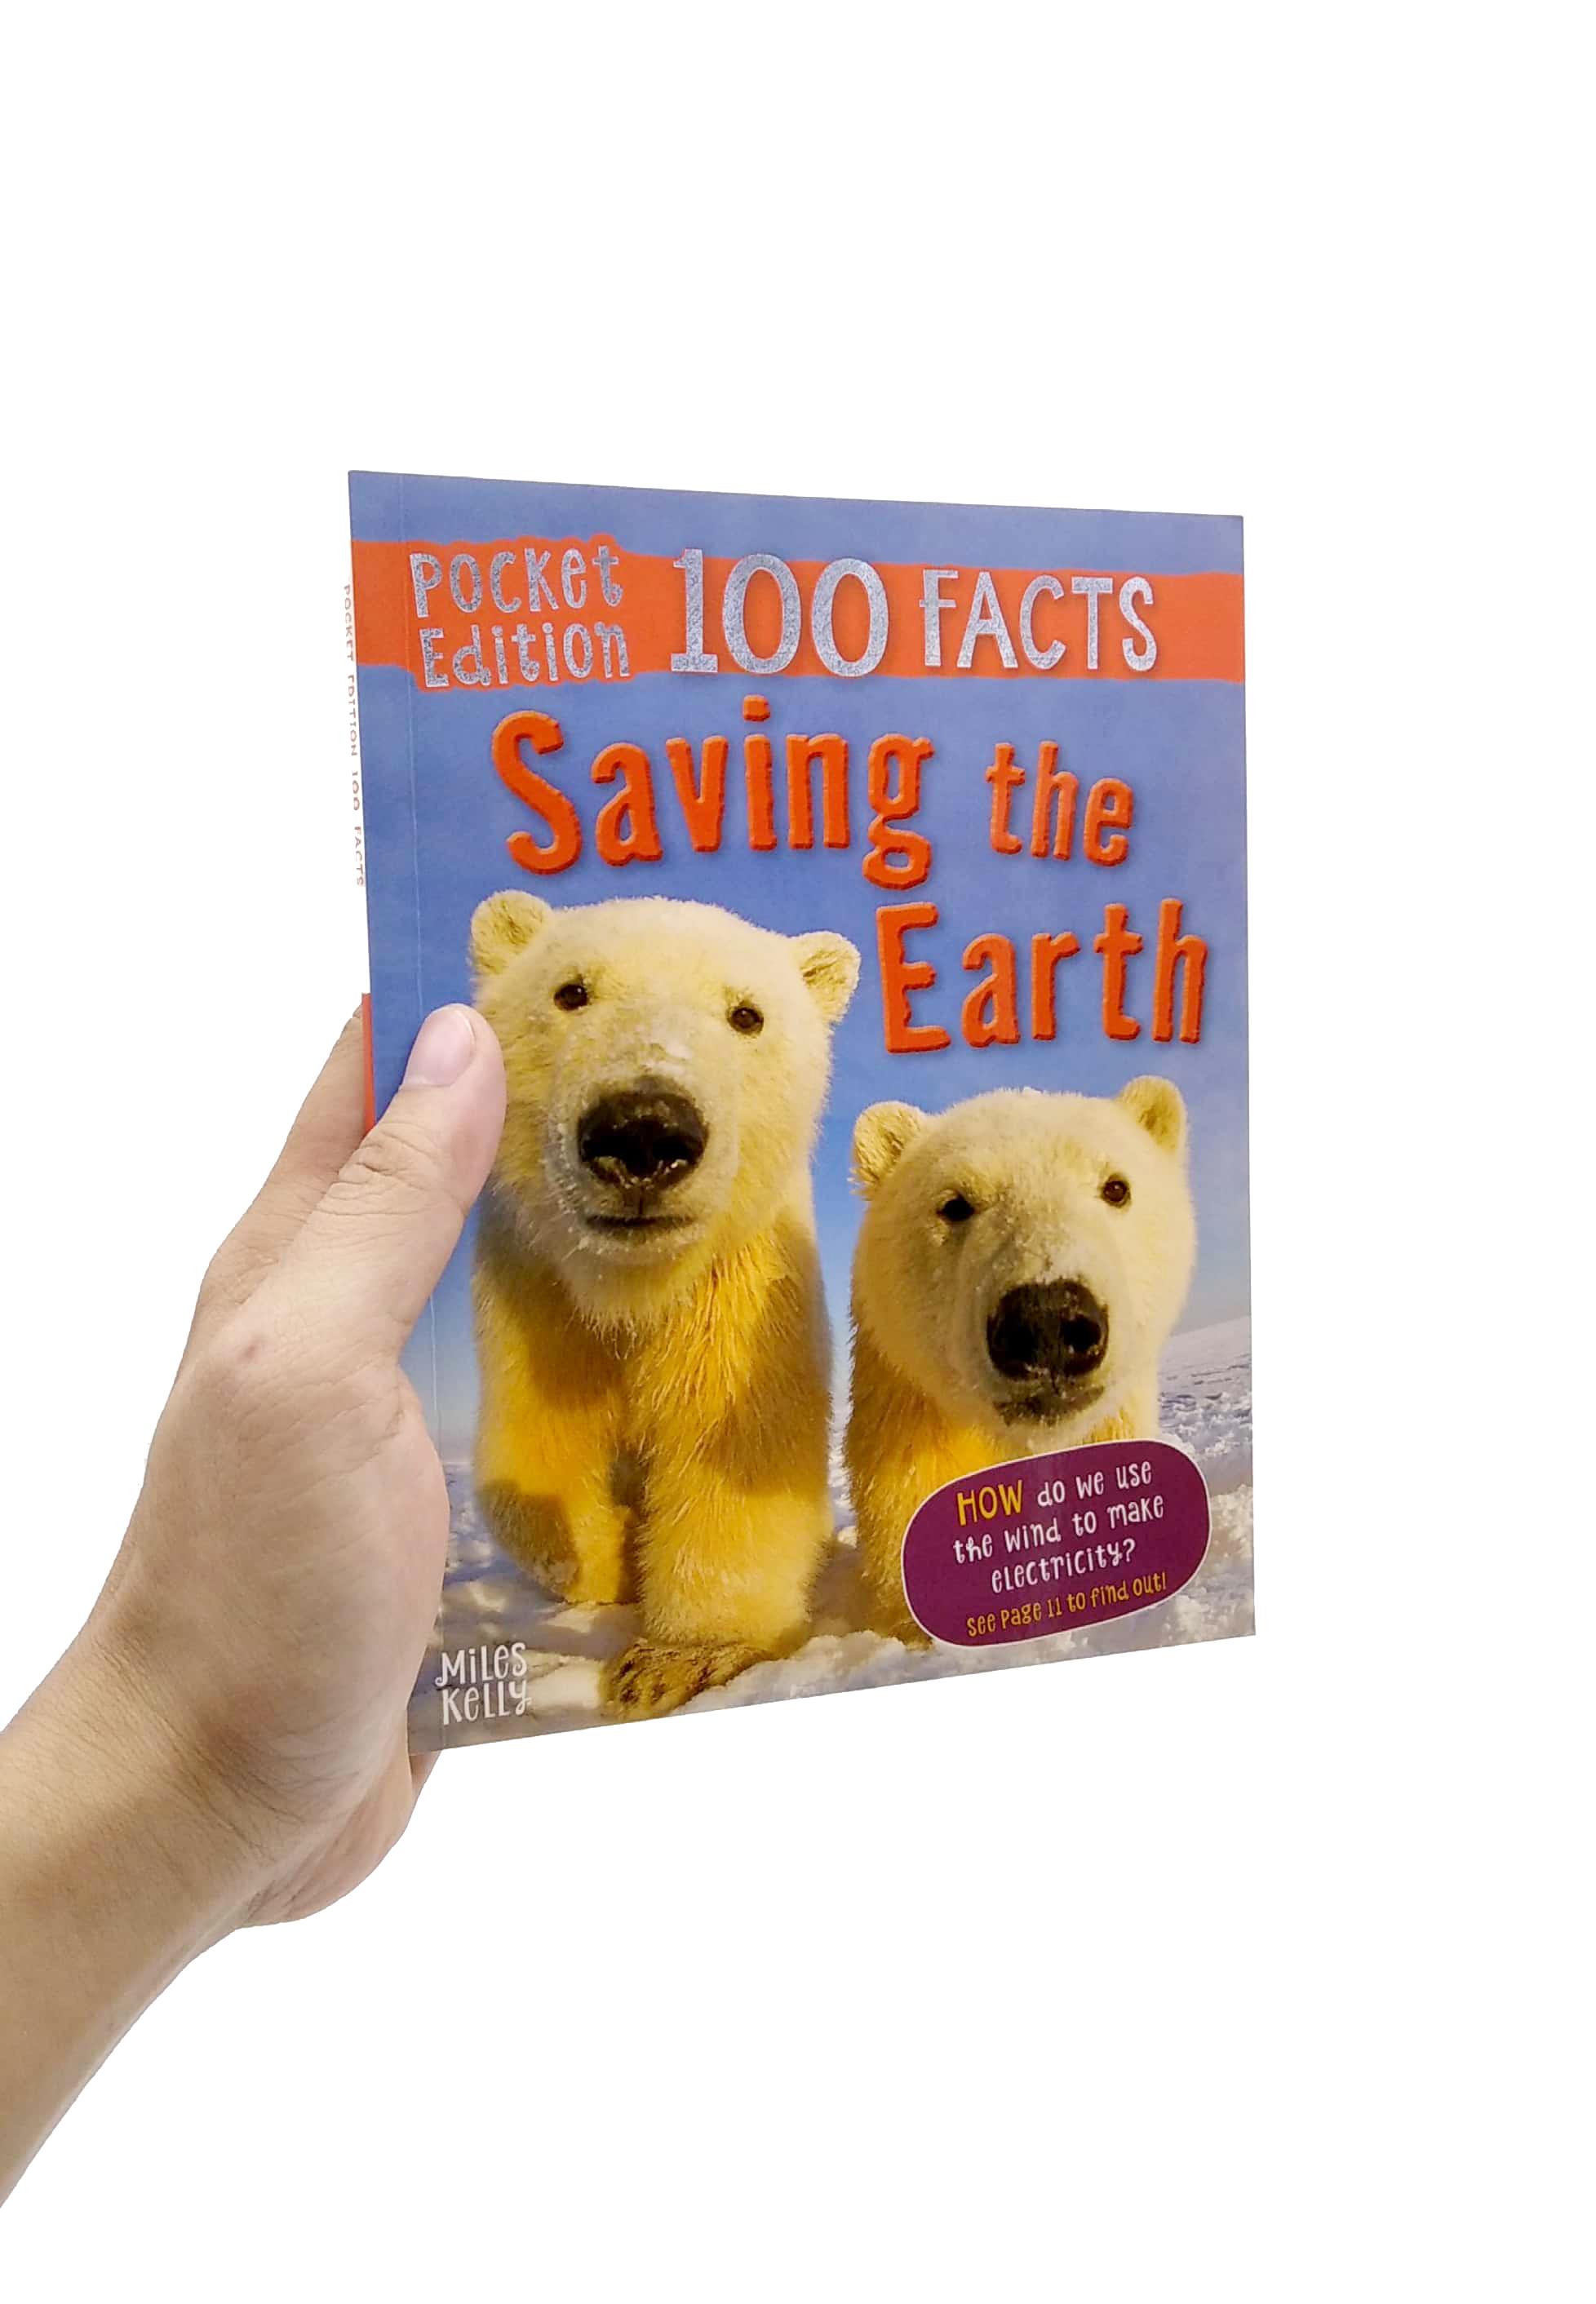 Pocket Edition 100 Facts Saving The Earth (100 Facts Pocket Edition)